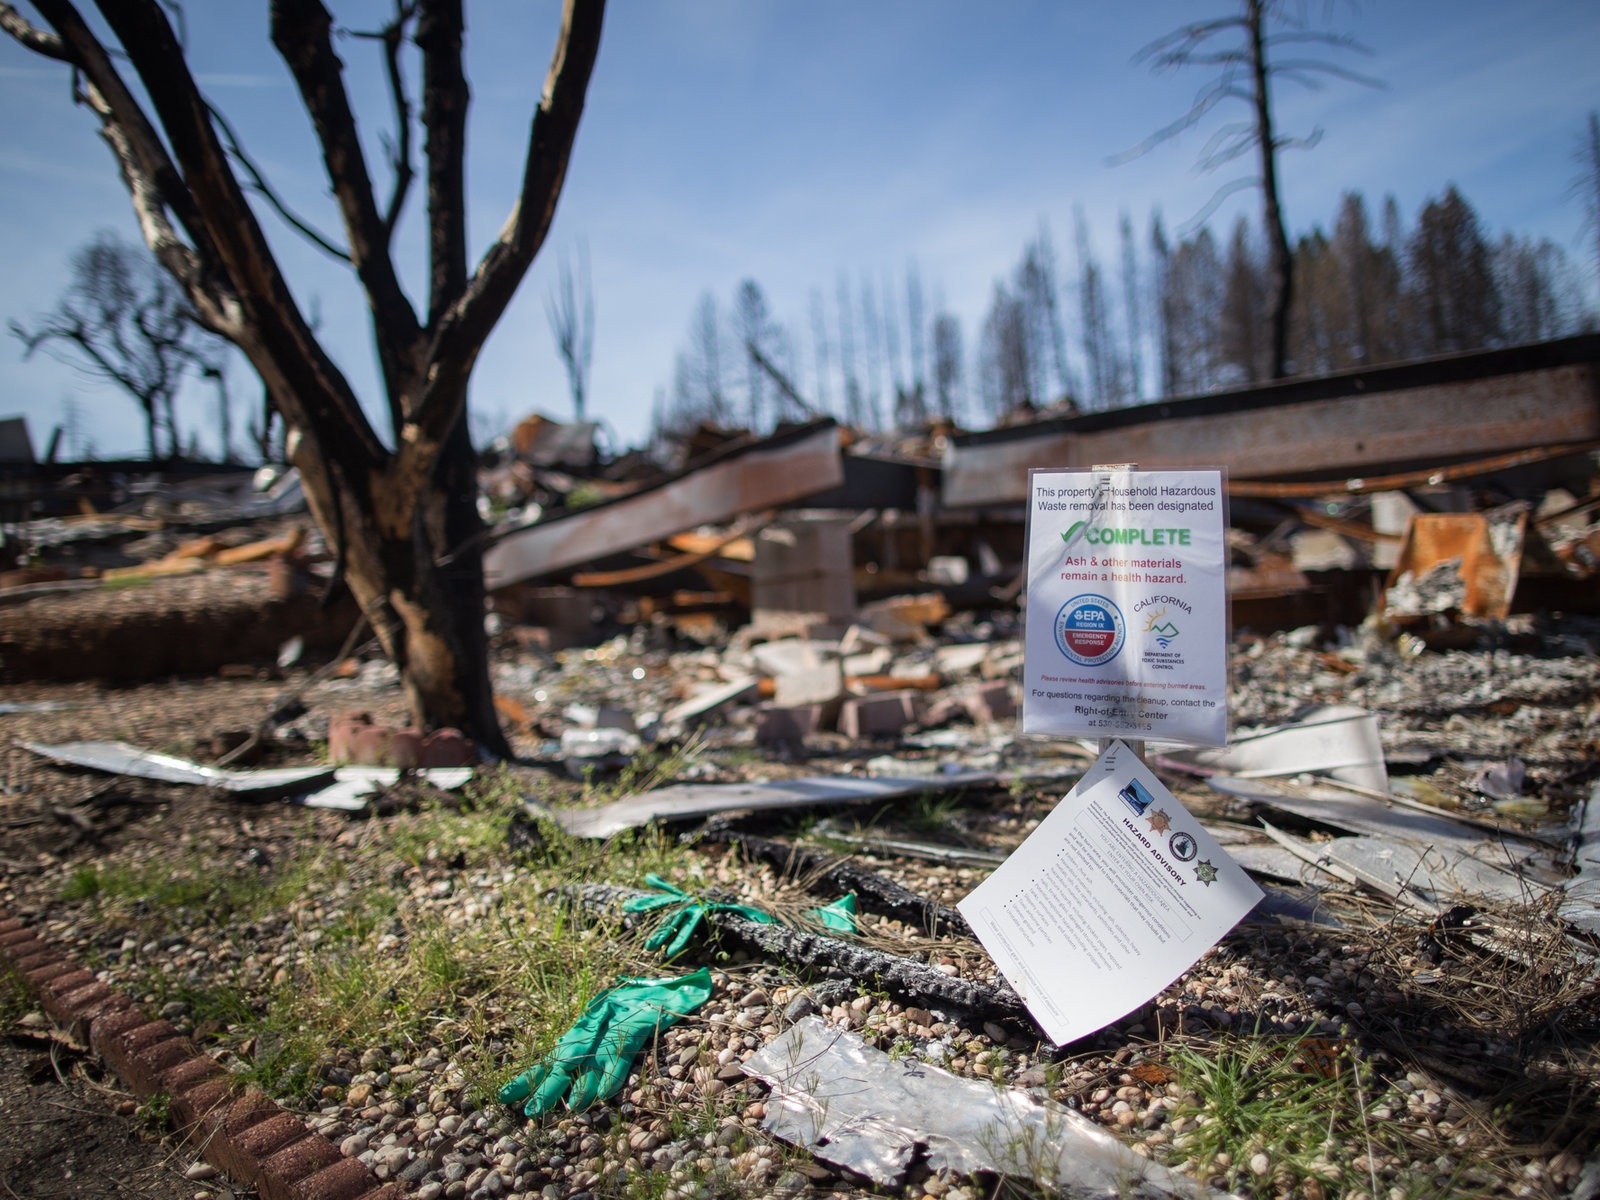 A mobile home park destroyed by last year's wildfire in Paradise, California. Those rebuilding homes and lives say they're getting contradictory messages about whether the water is safe to drink. CREDIT: Meredith Rizzo/NPR